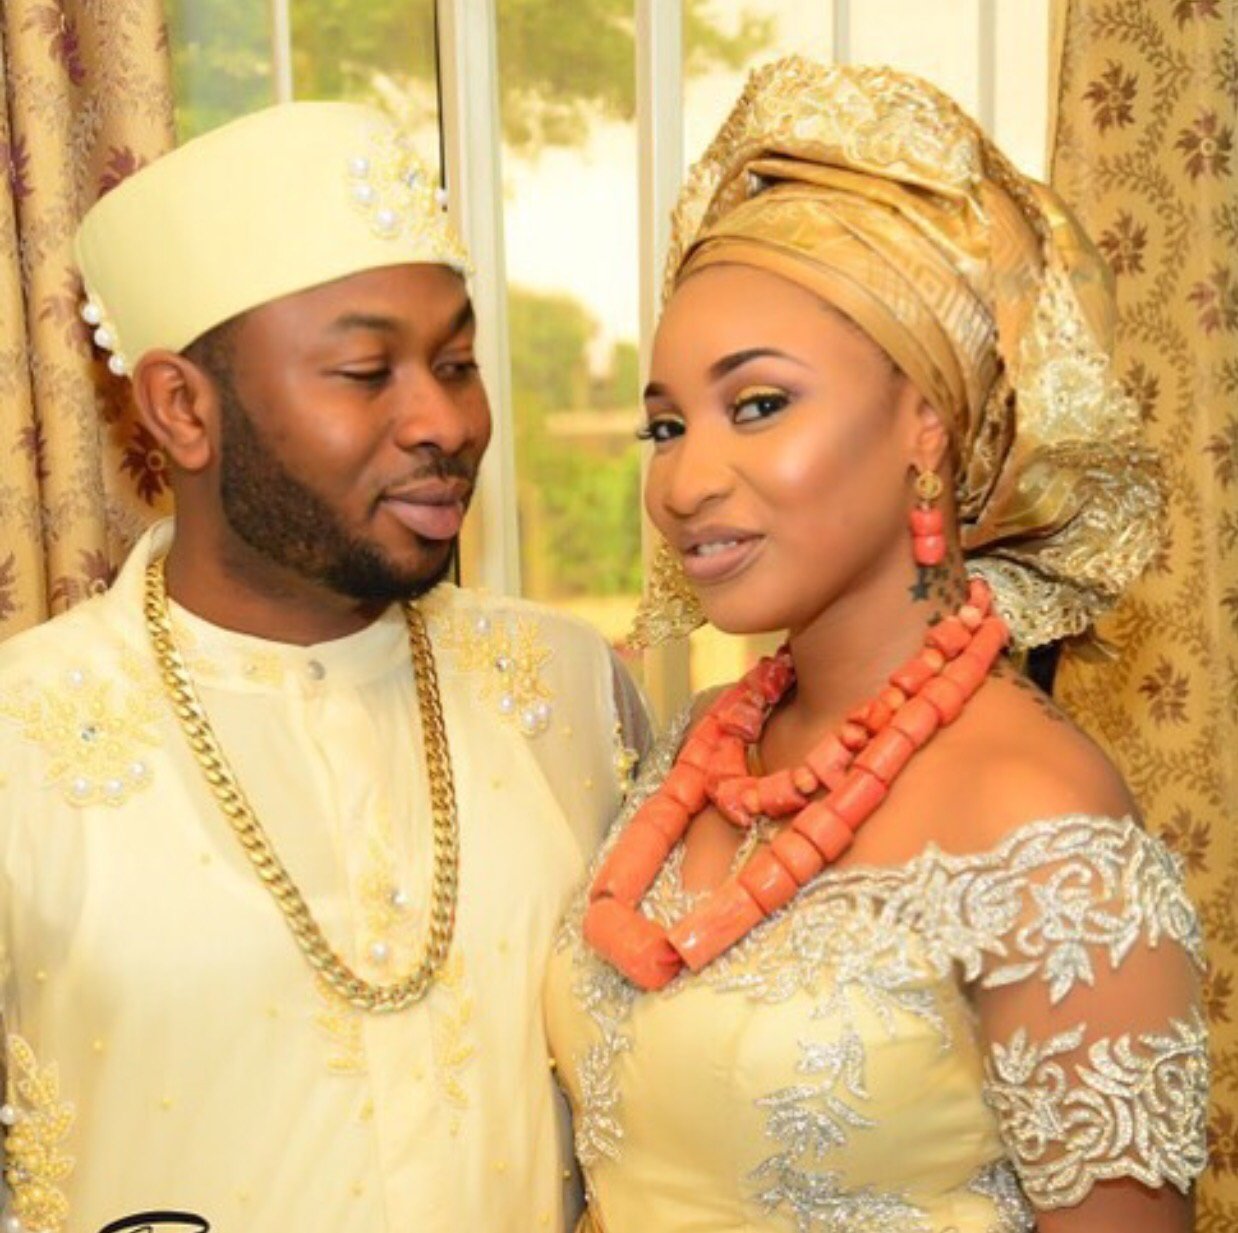 Tonto Dikeh’s Lawyer Warns Media Against Using the Video Released by her Ex-Husband’s Camp